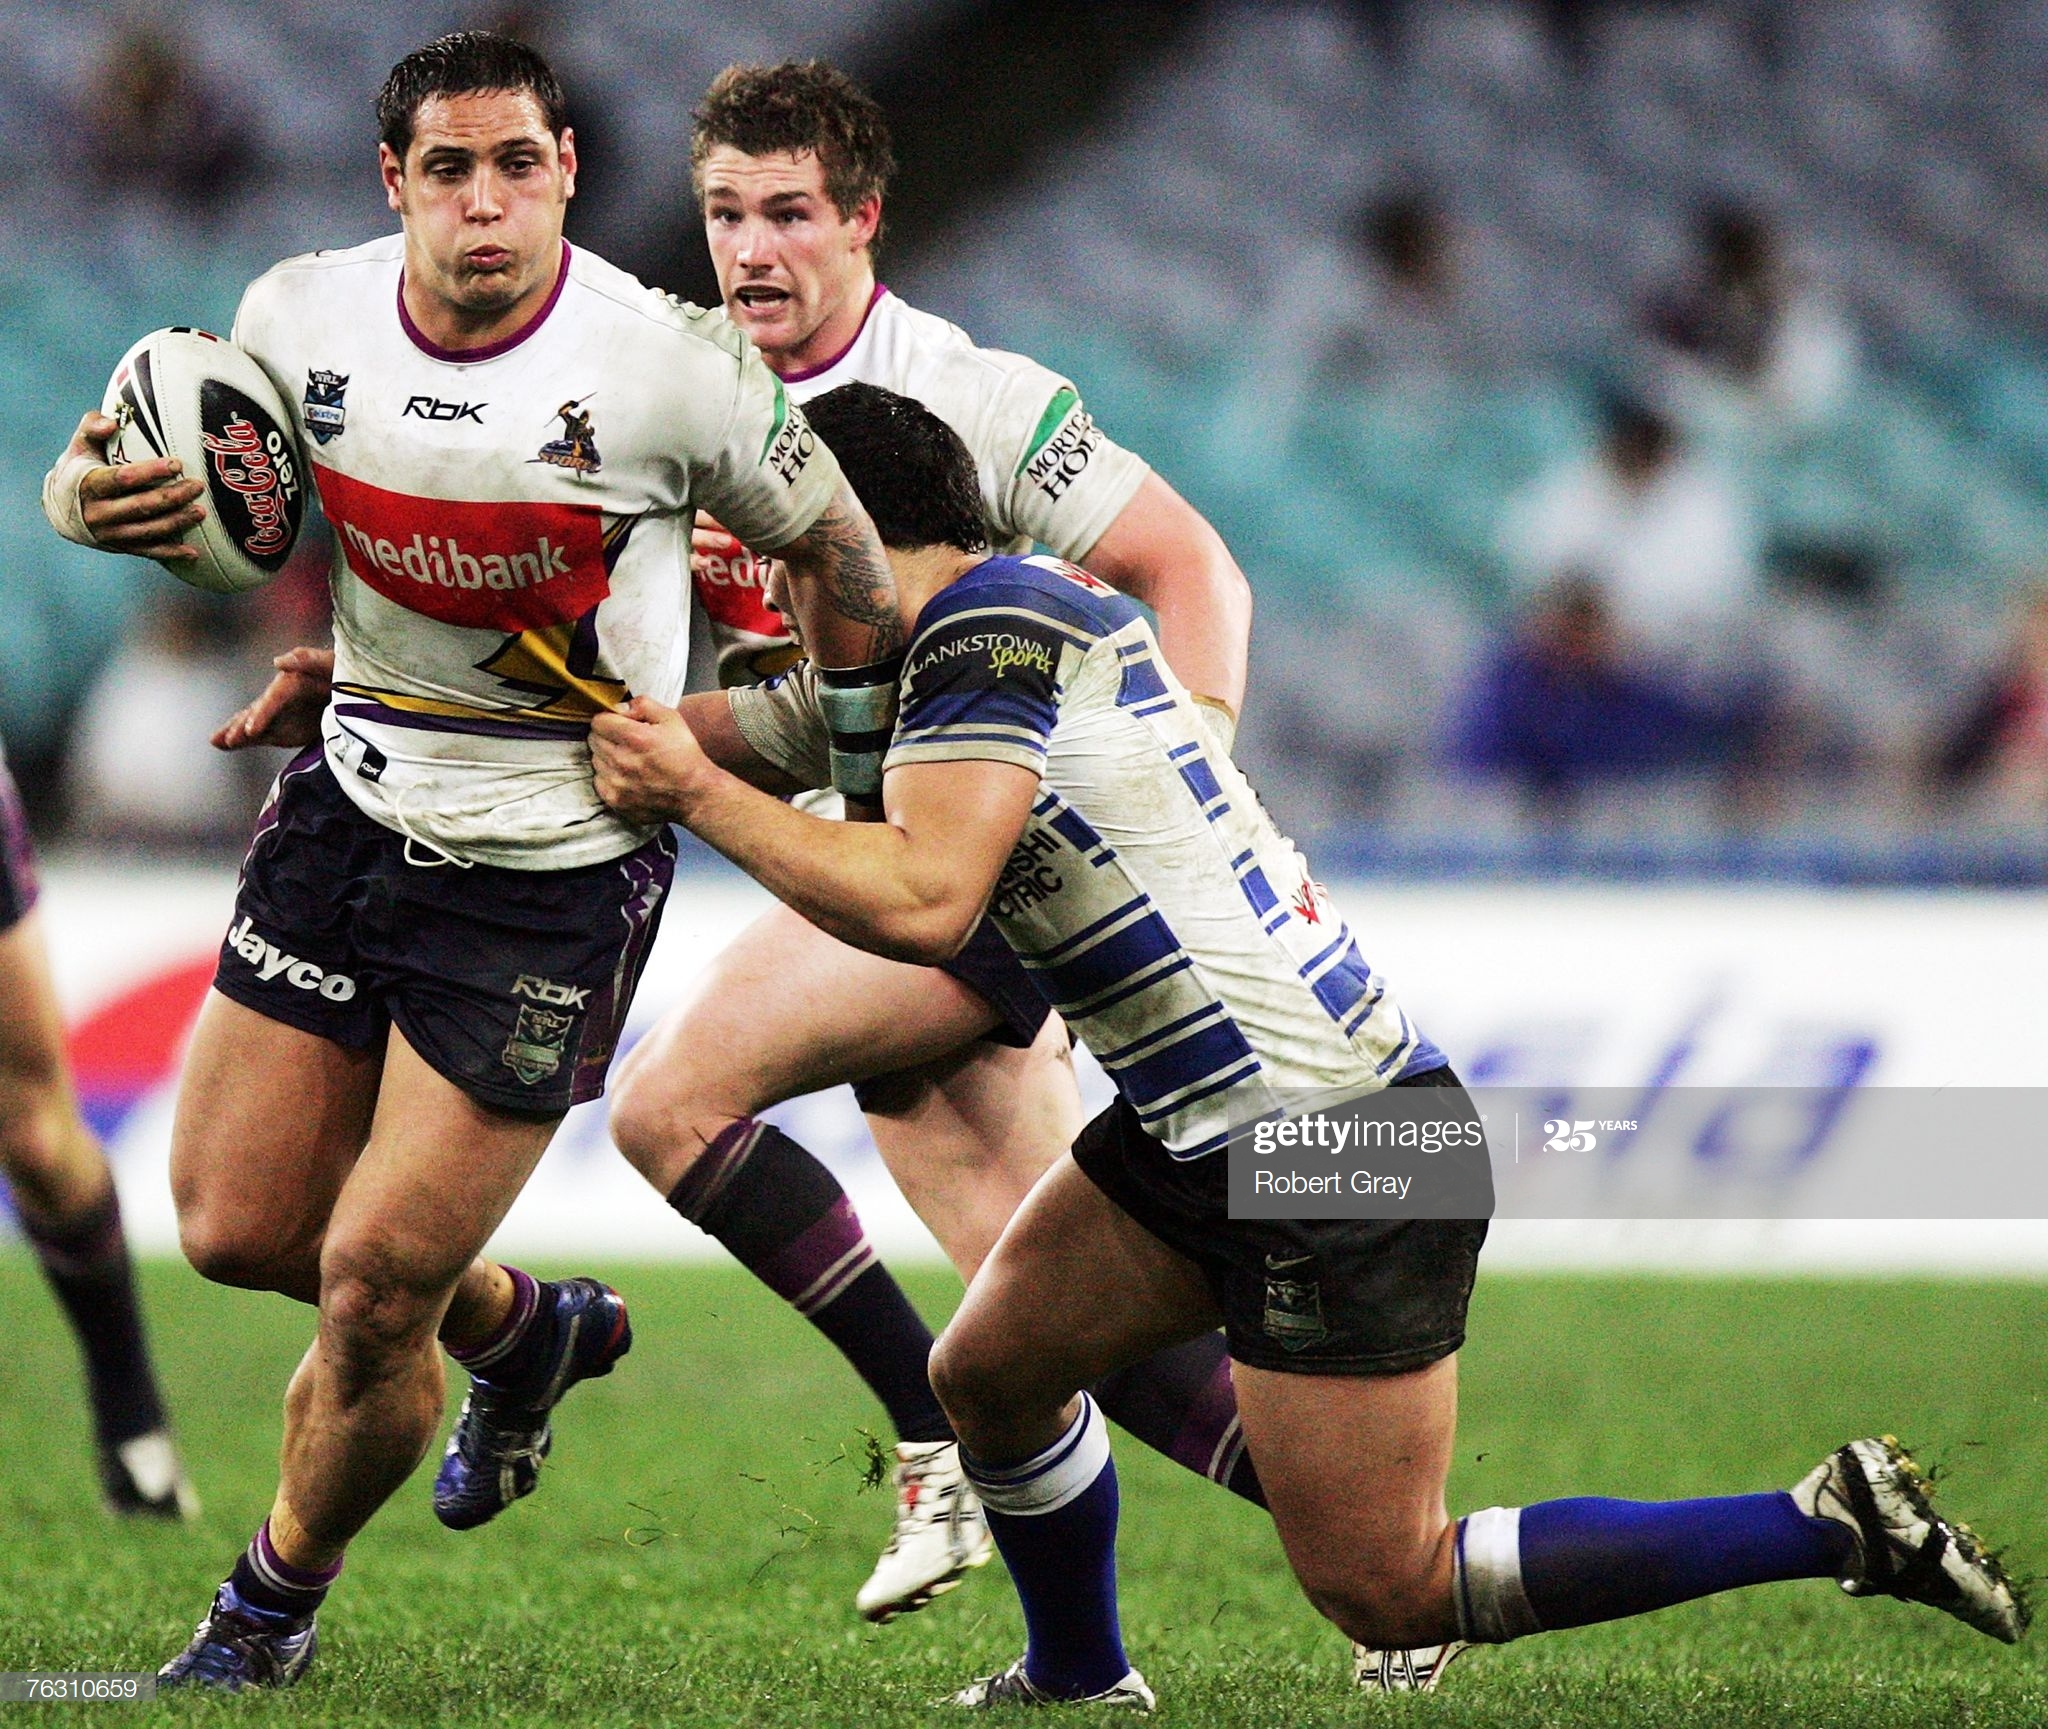 jeremy-smith-of-the-storm-is-tackled-during-the-round-24-nrl-match-picture-id76310659